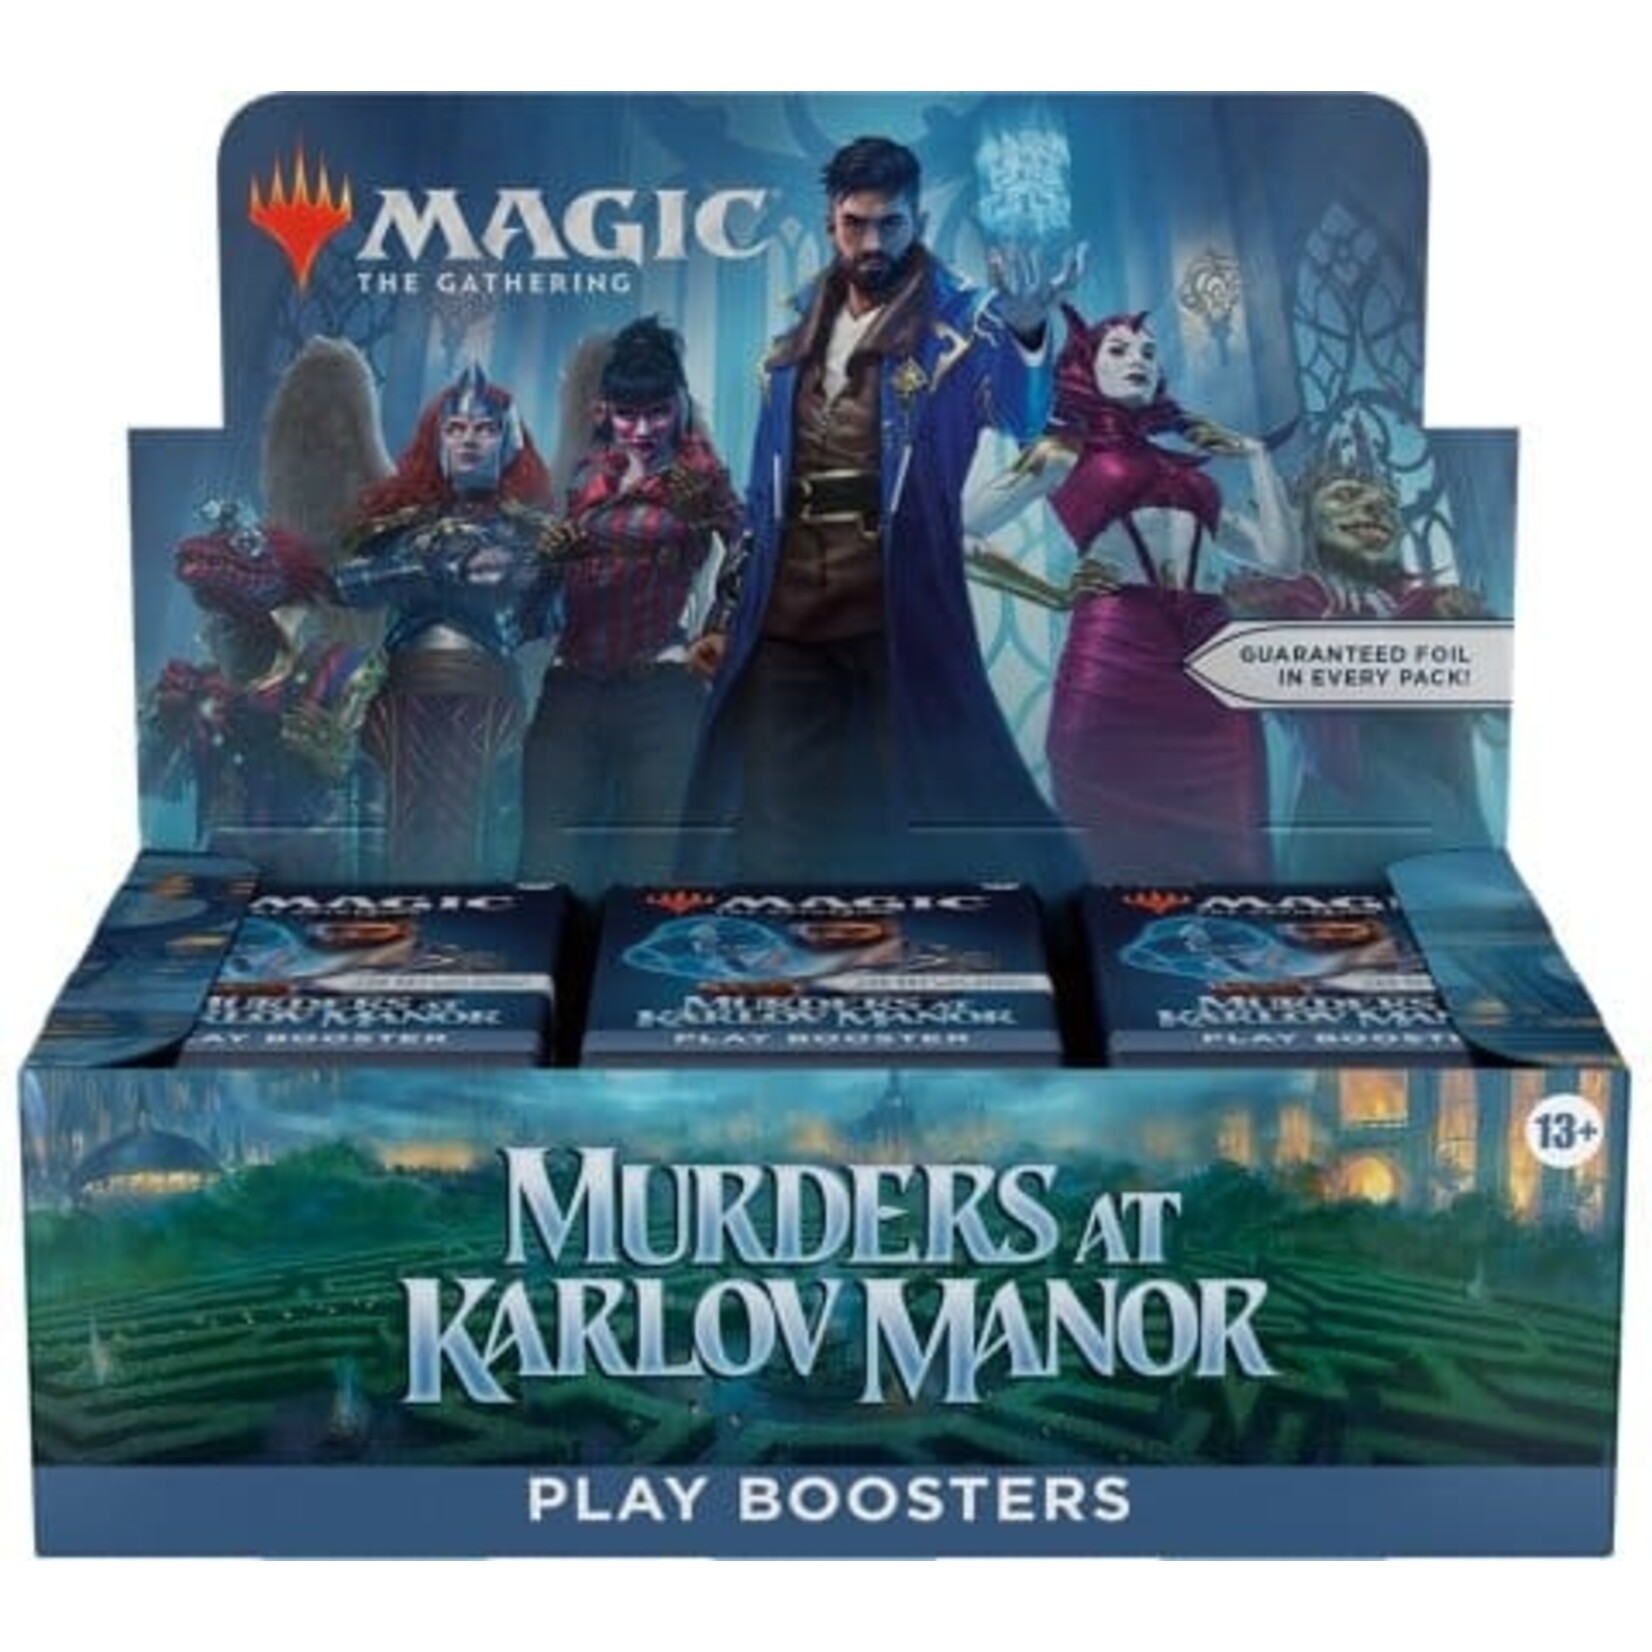 Magic the gathering Murders at Karlov Manor - Play booster box -